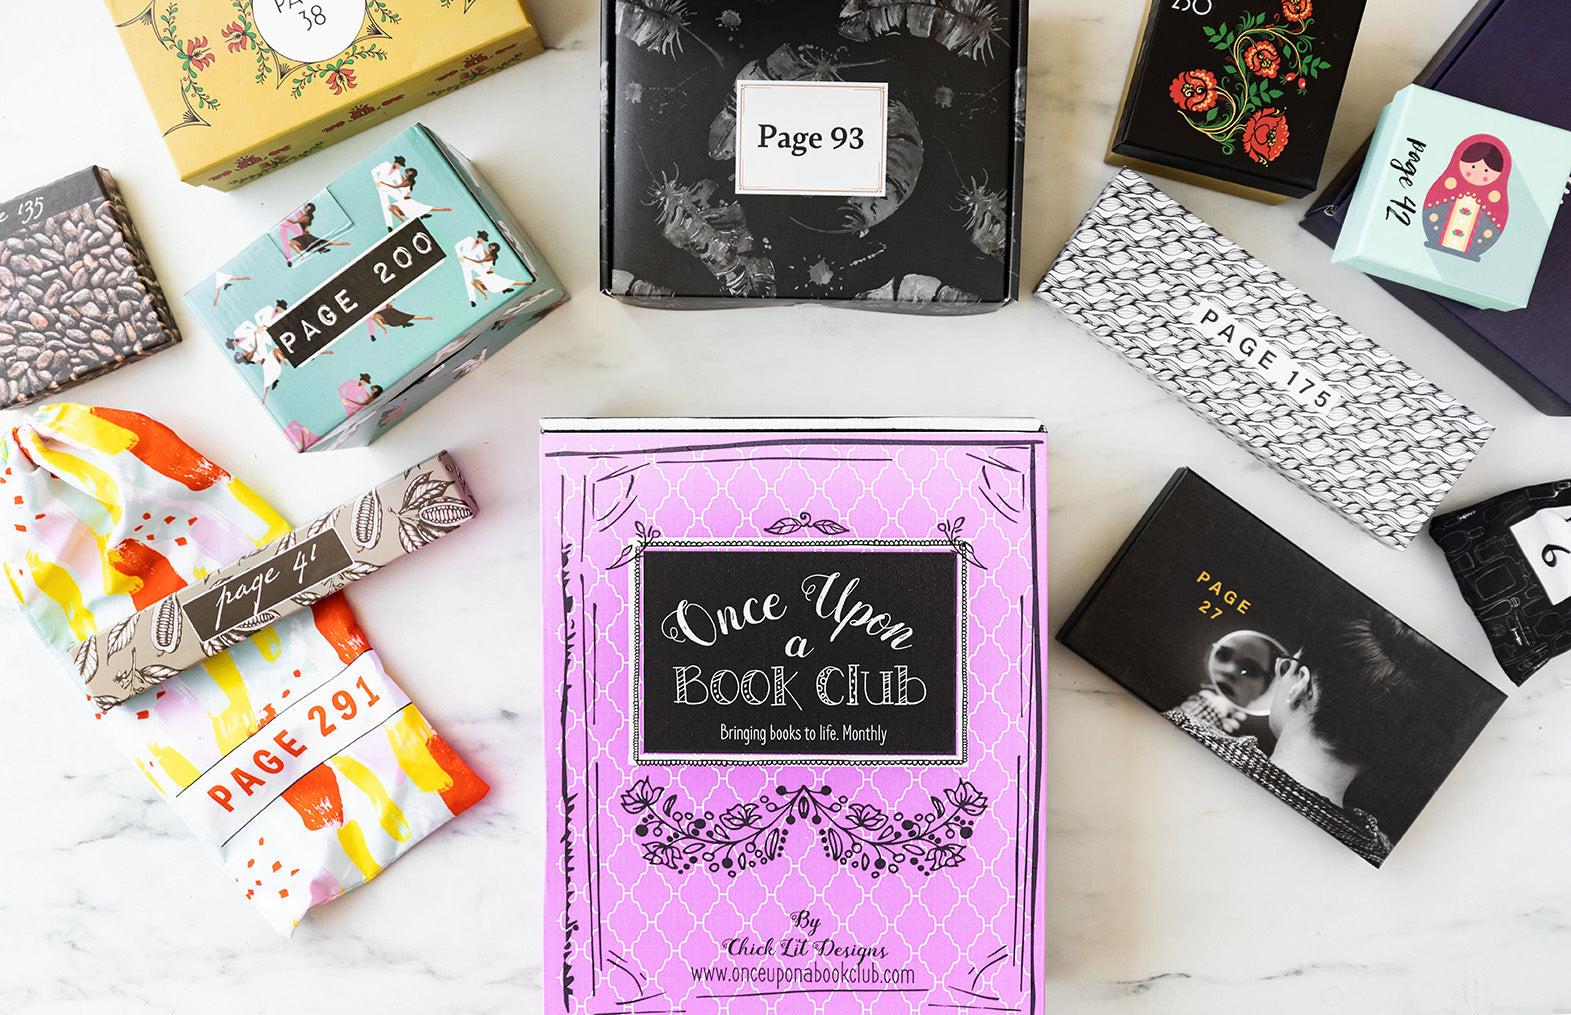 7 Book Subscription Boxes We Love for Adults and Kids in 2023